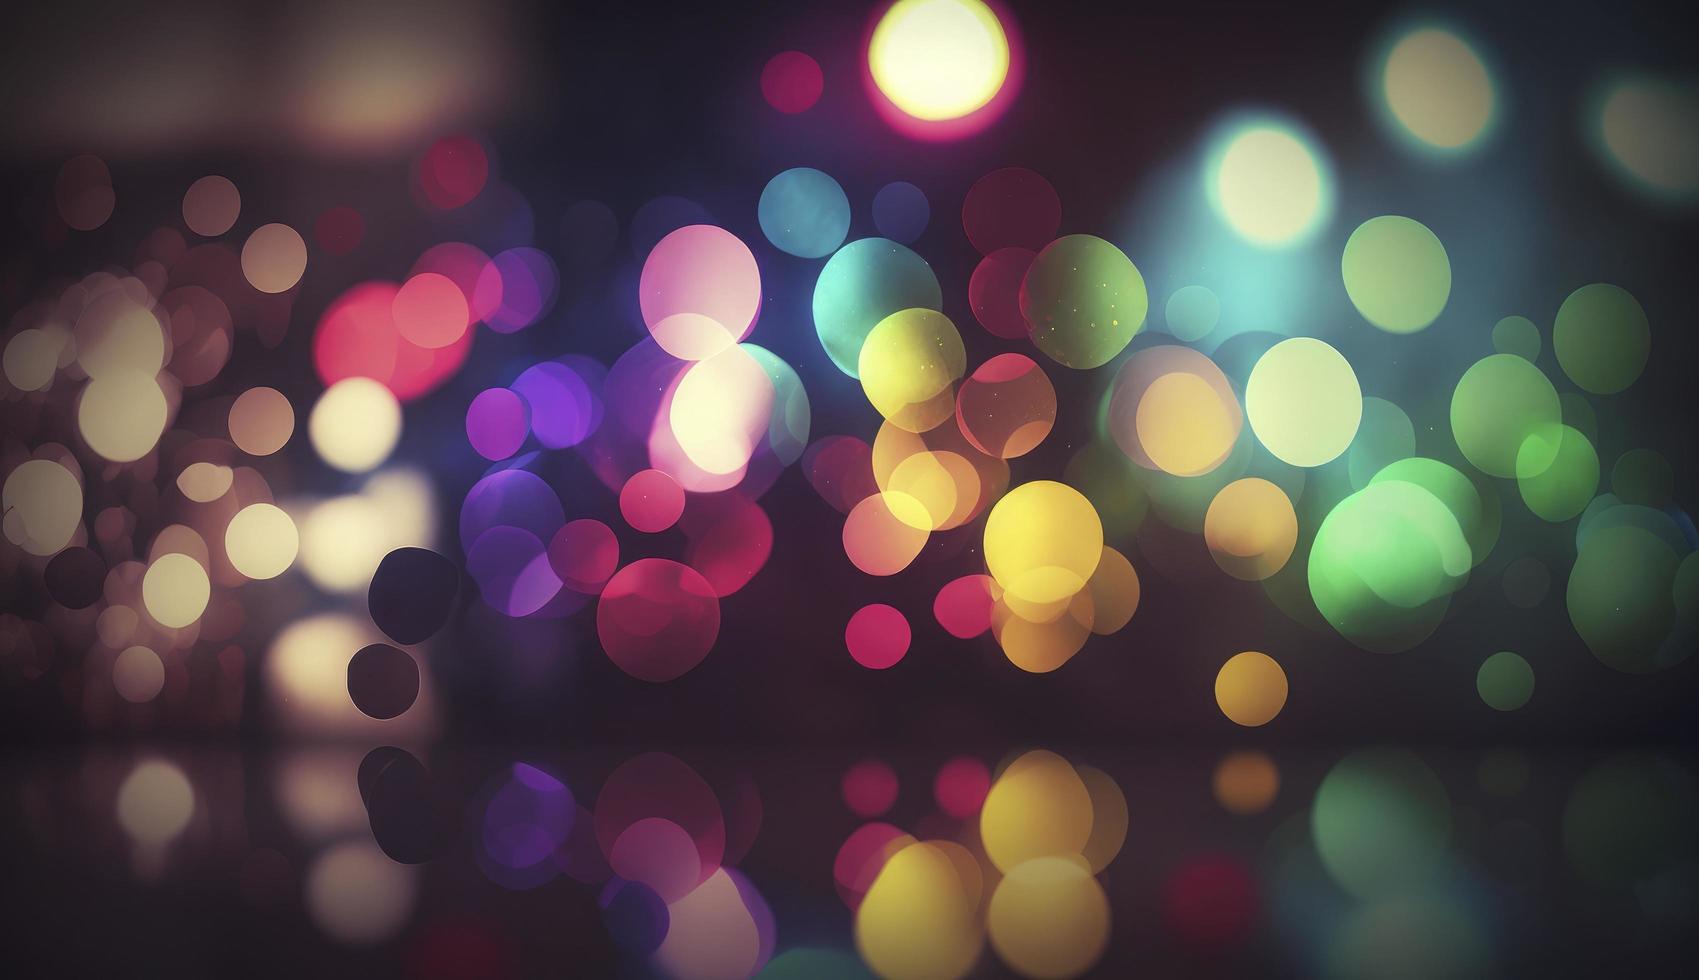 Defocused film texture background with colored lights on dark background. Blurred rainbow color light flare for photo effects, Generate Ai